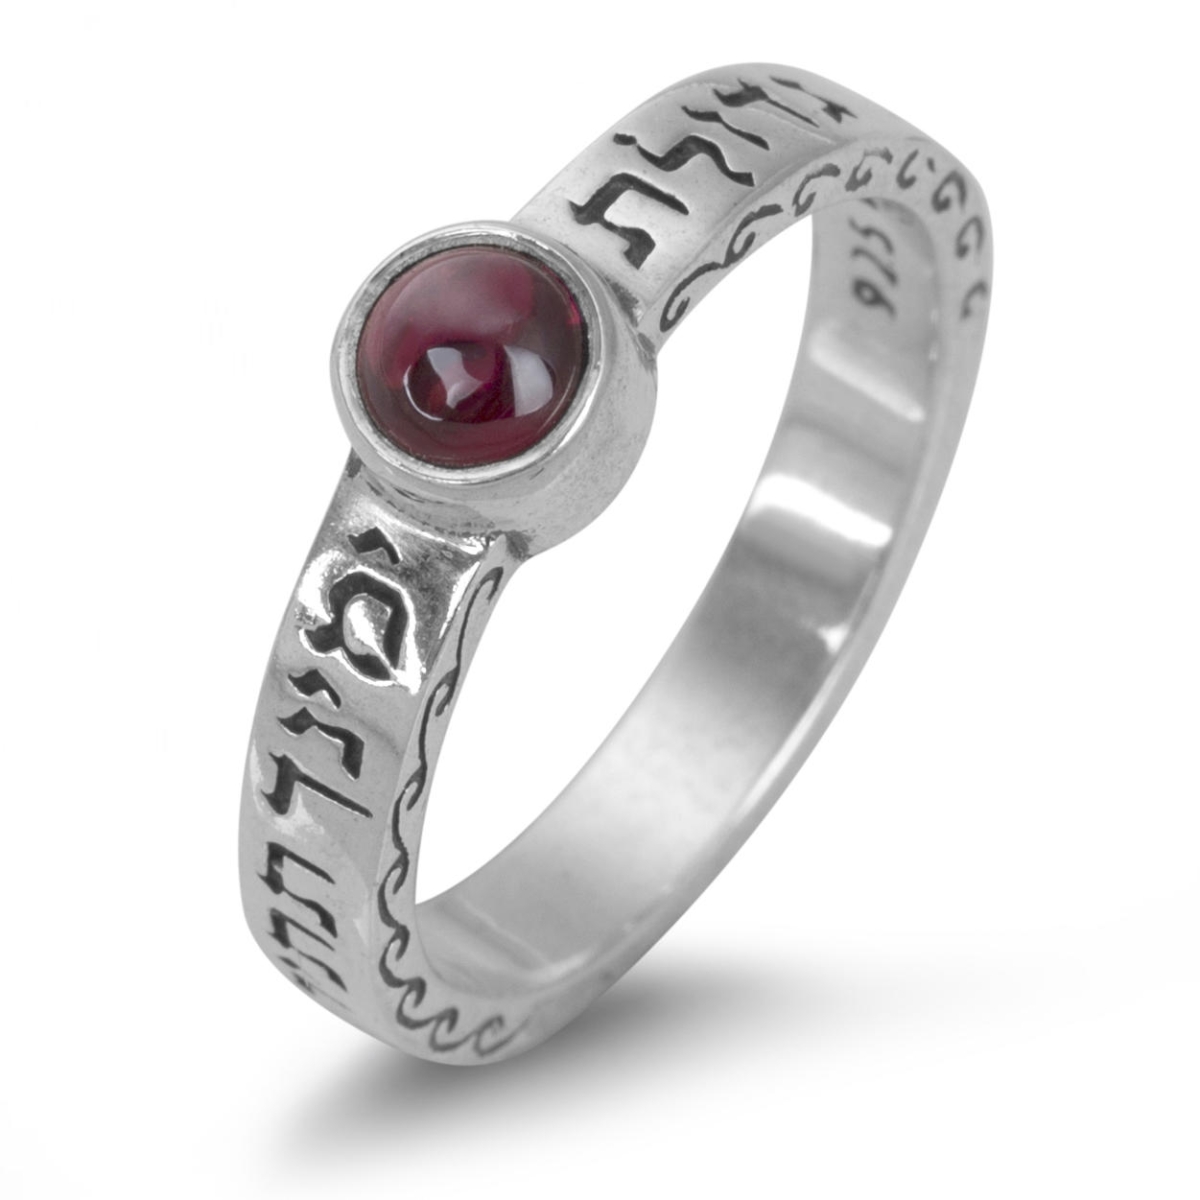 Sterling Silver Thin Ana Bekoach Ring with Garnet - 1